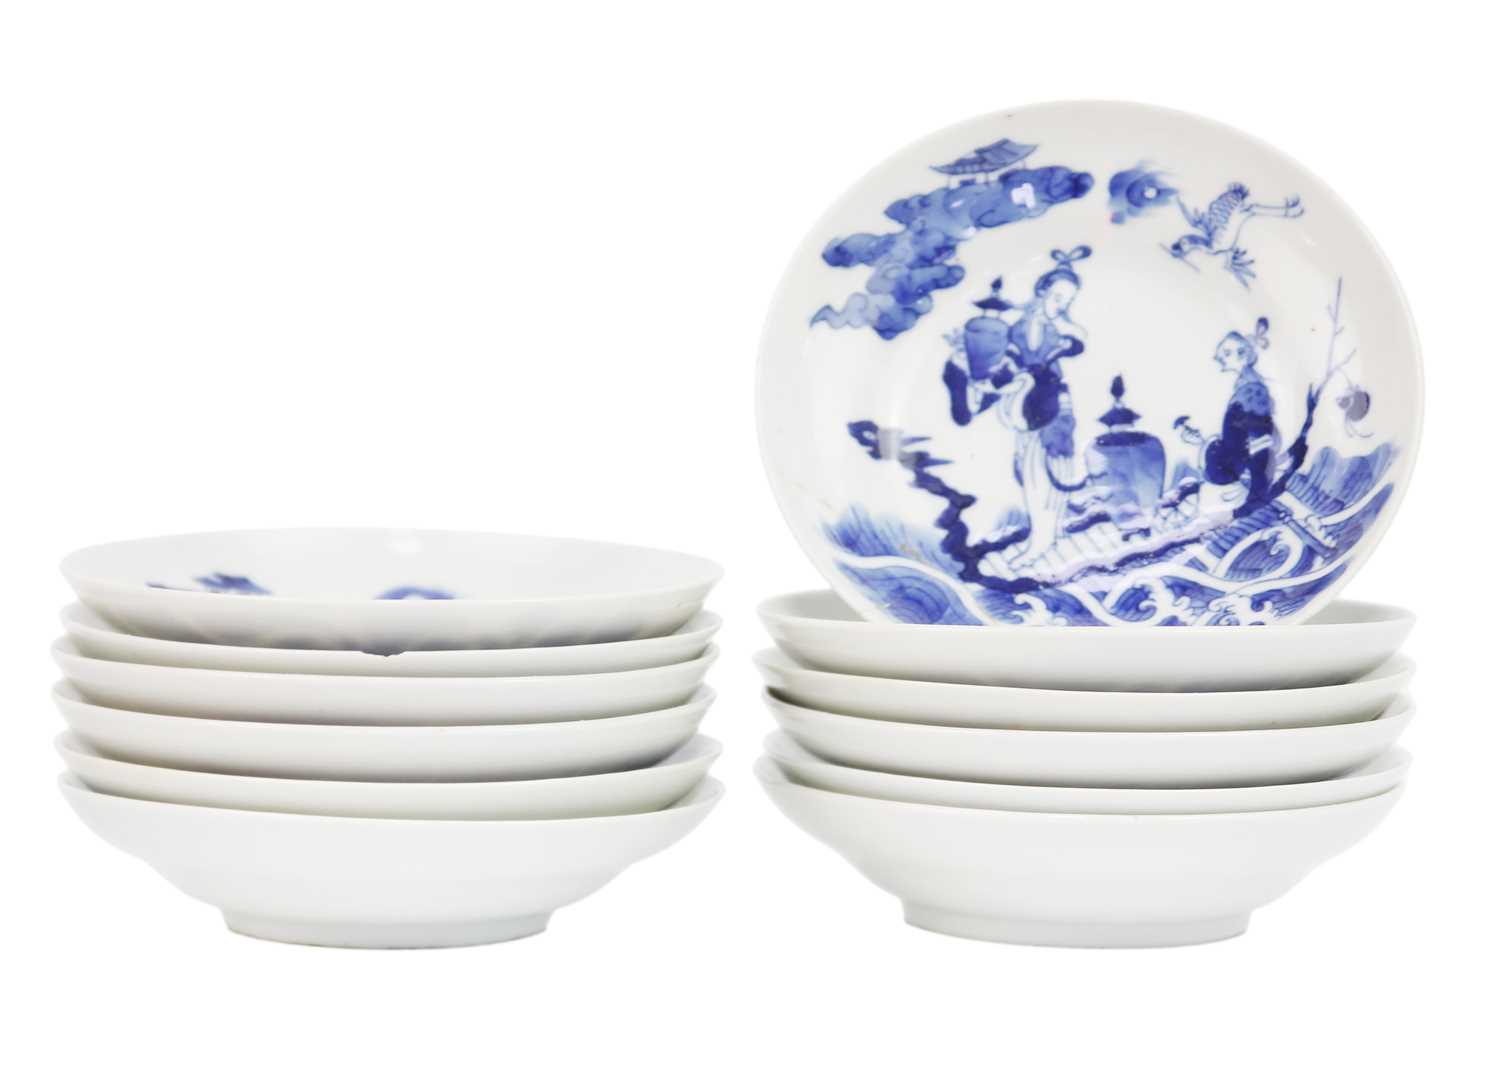 A set of Chinese blue and white porcelain cups, covers and stands, 18th century. - Image 9 of 41